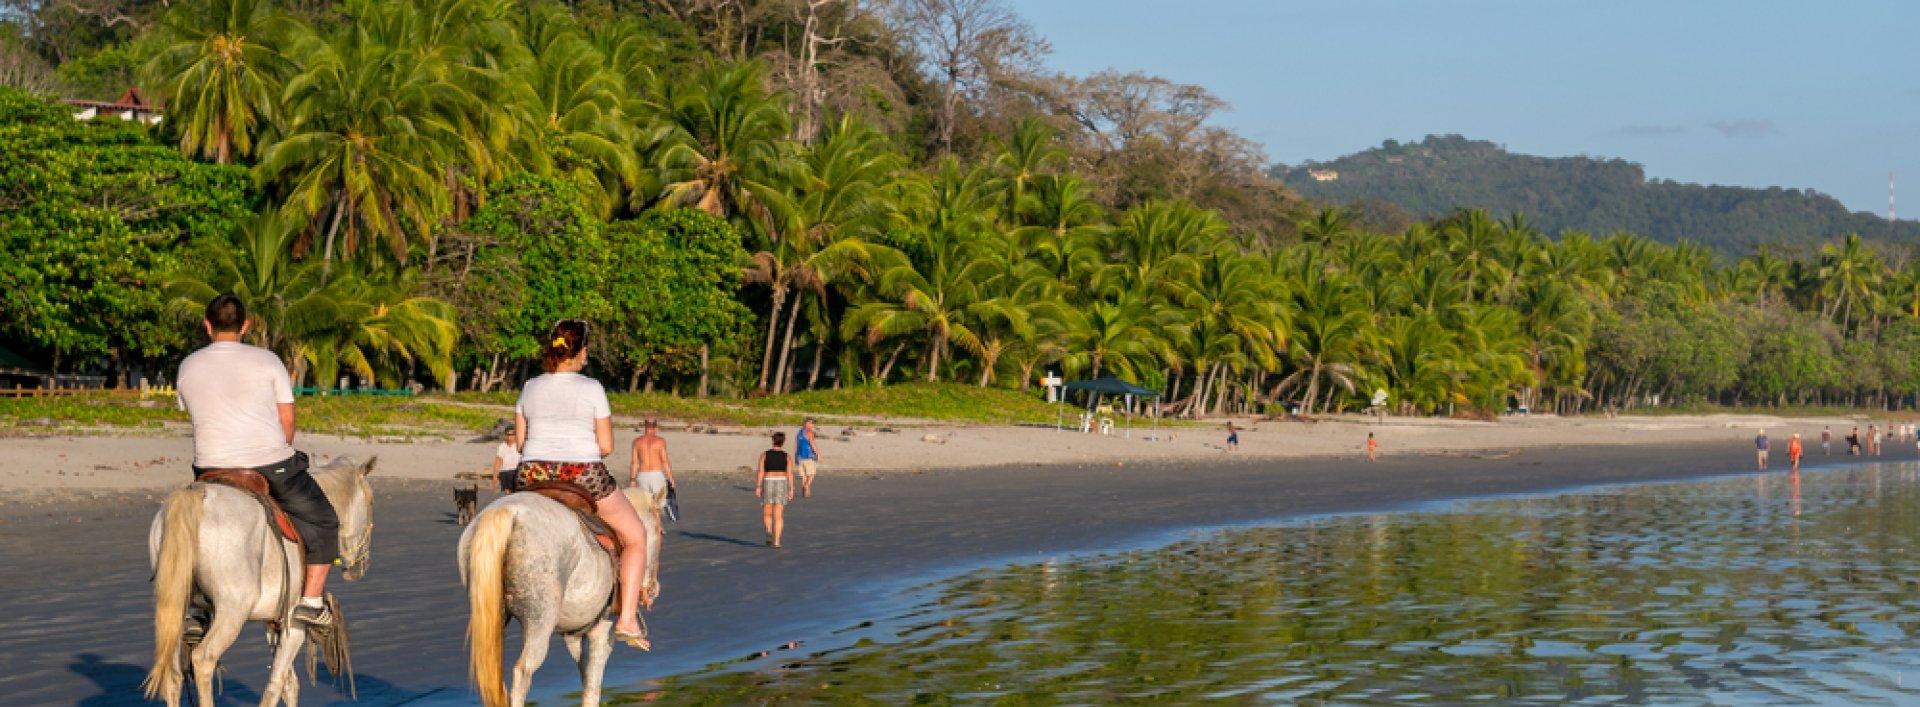 Know Why Choose Costa Rica for Retirement?